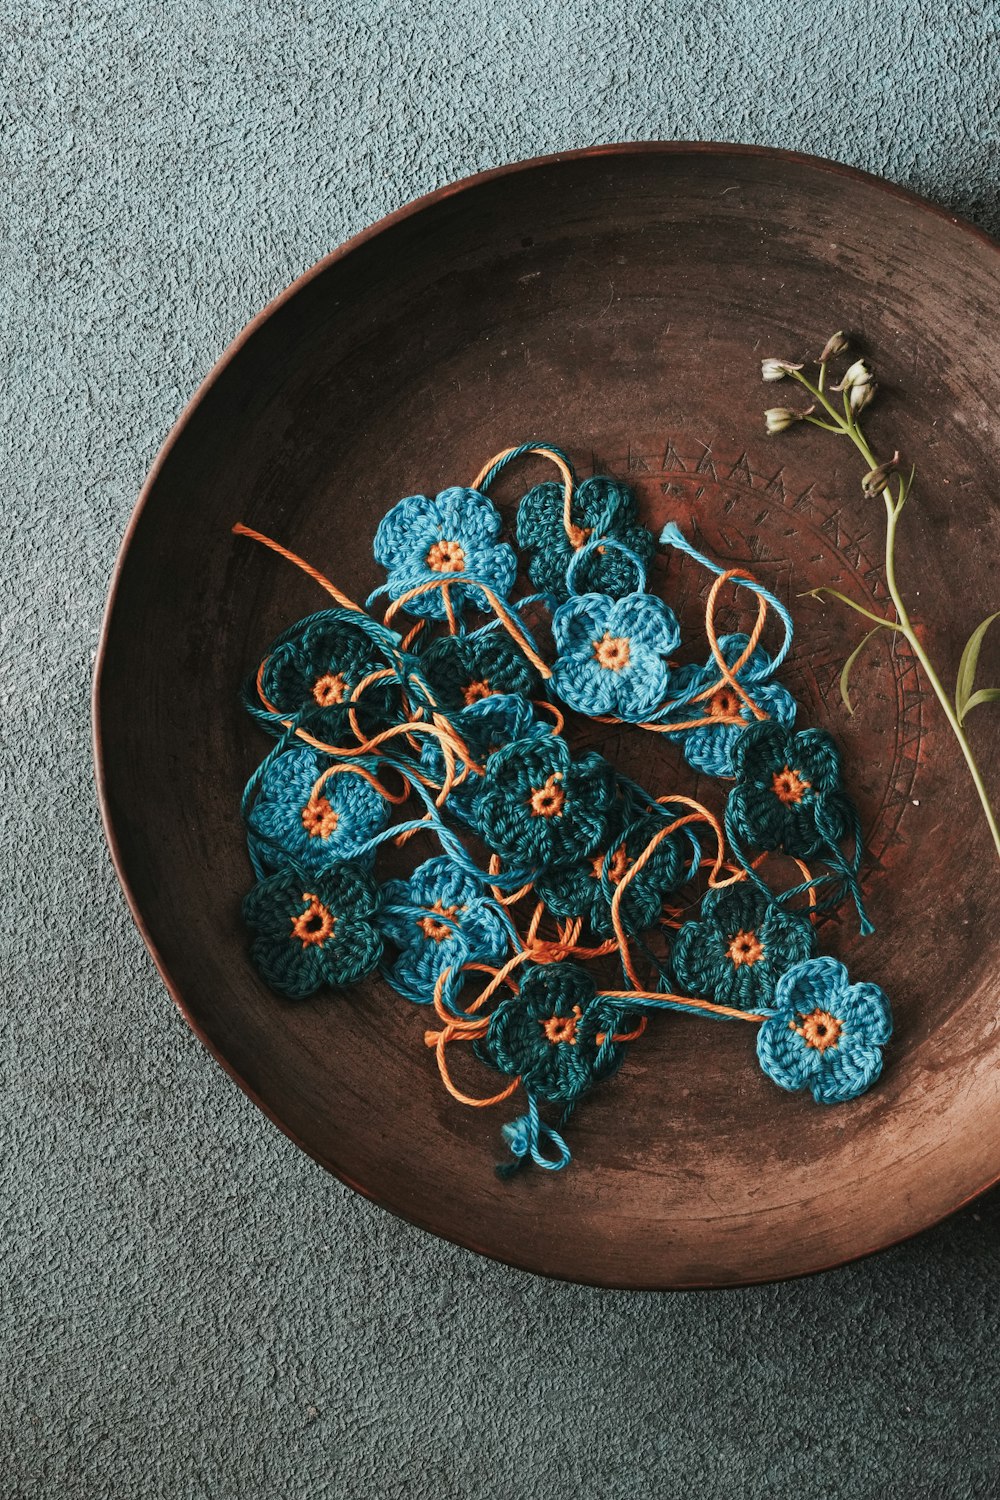 a bowl of crocheted flowers on a gray carpet